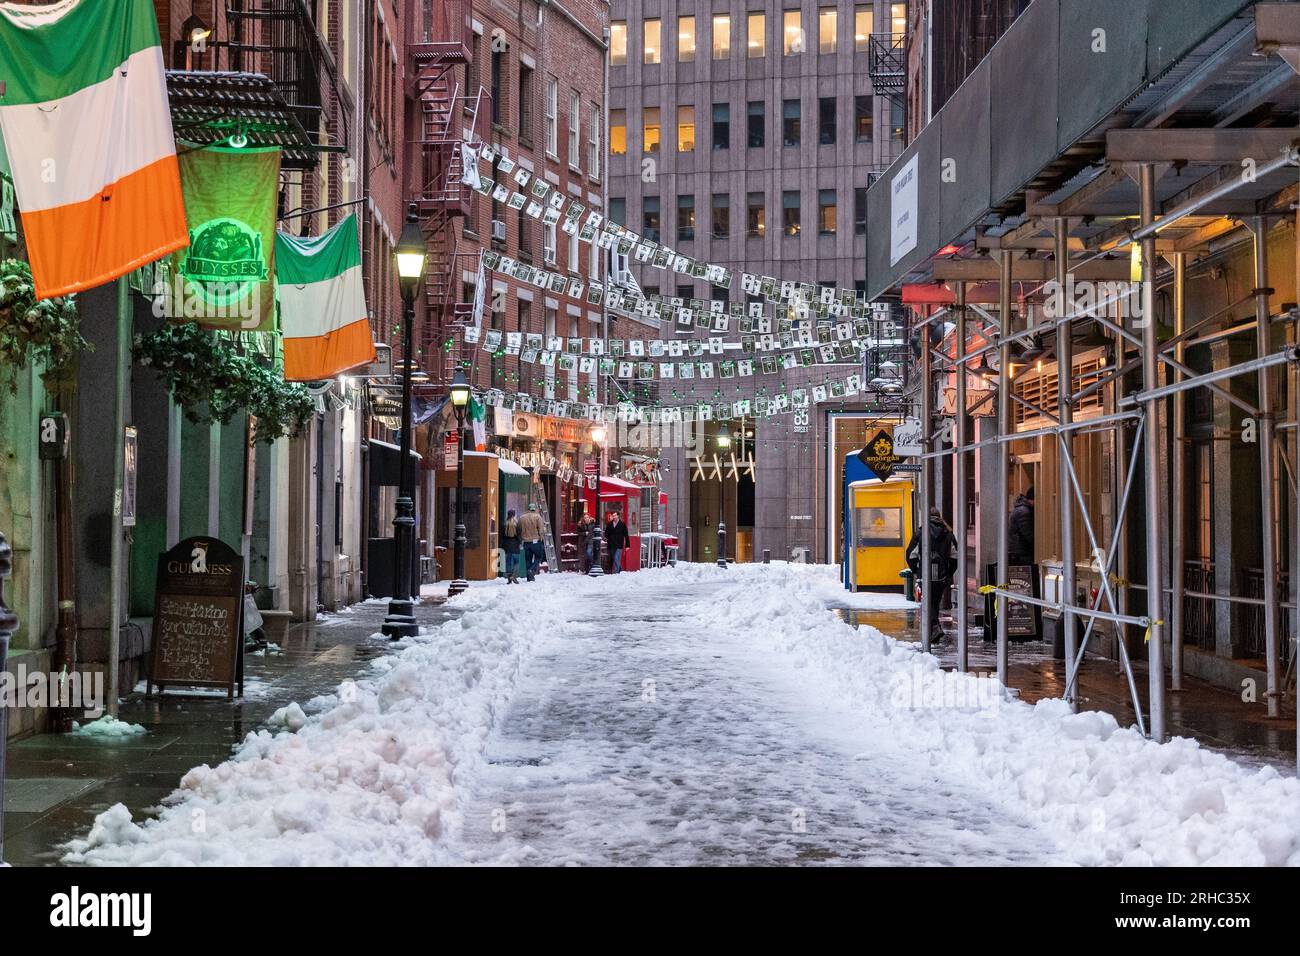 Stone Street, Lower Manhattan, New York City, New York, USA on a snowy day in March Stock Photo